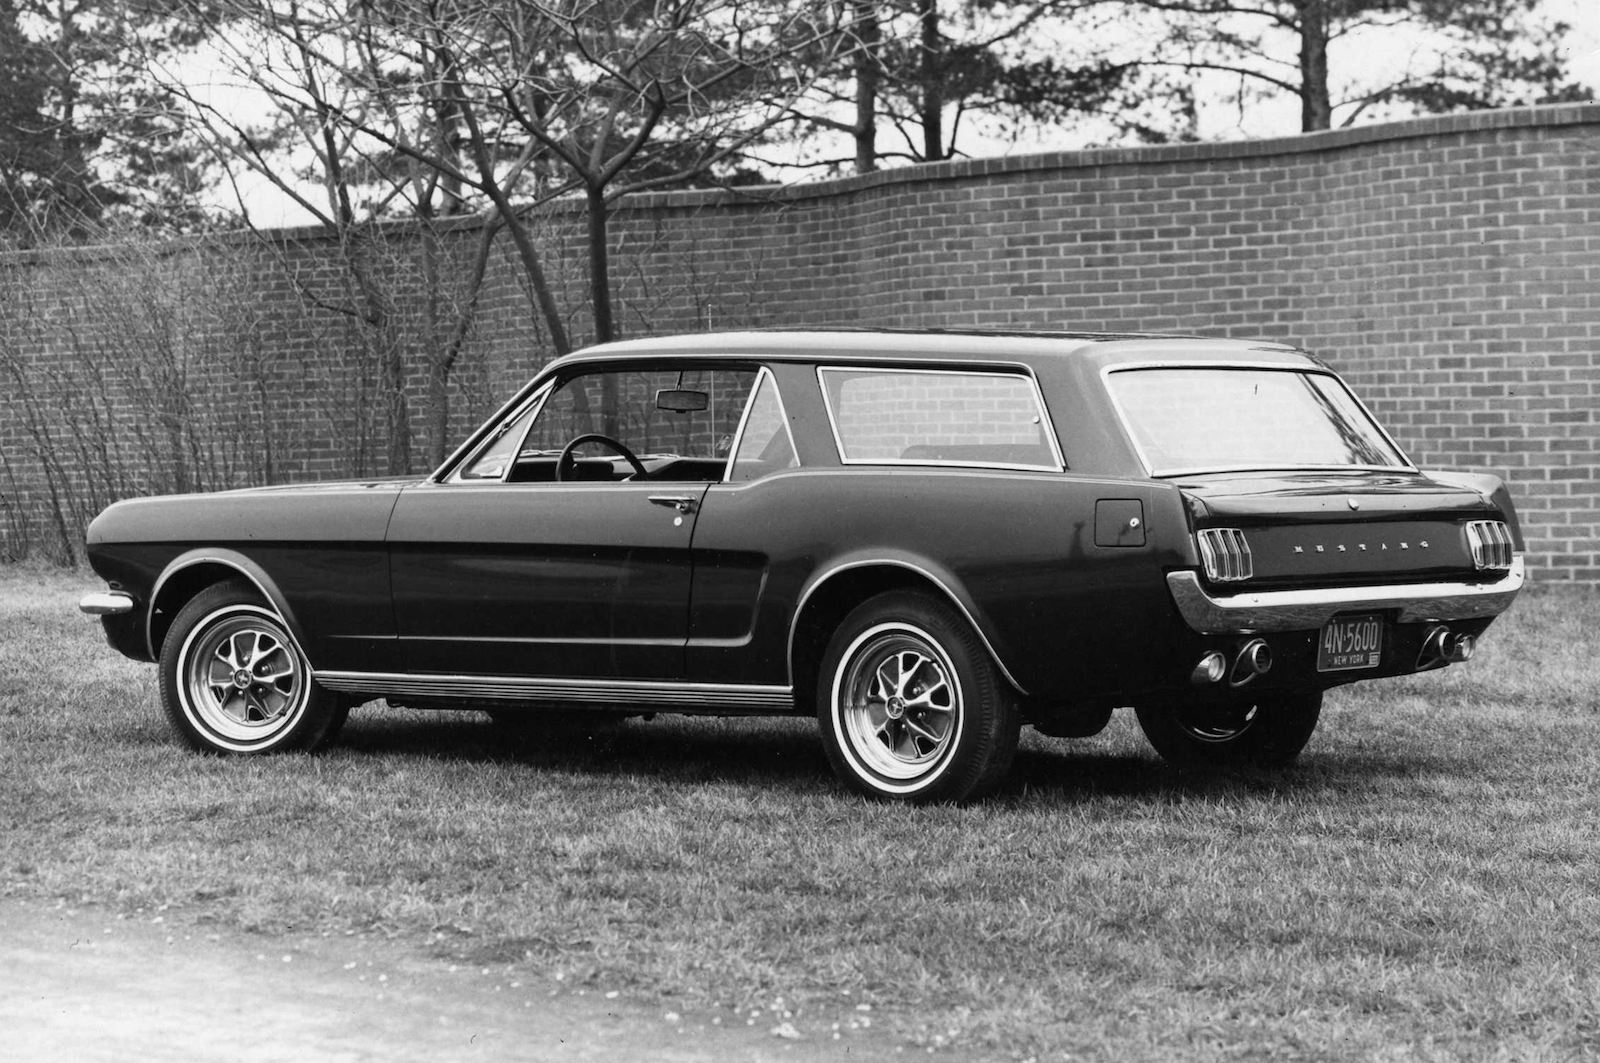 Where Is The Ford Mustang Station Wagon That Was Made In Italy?